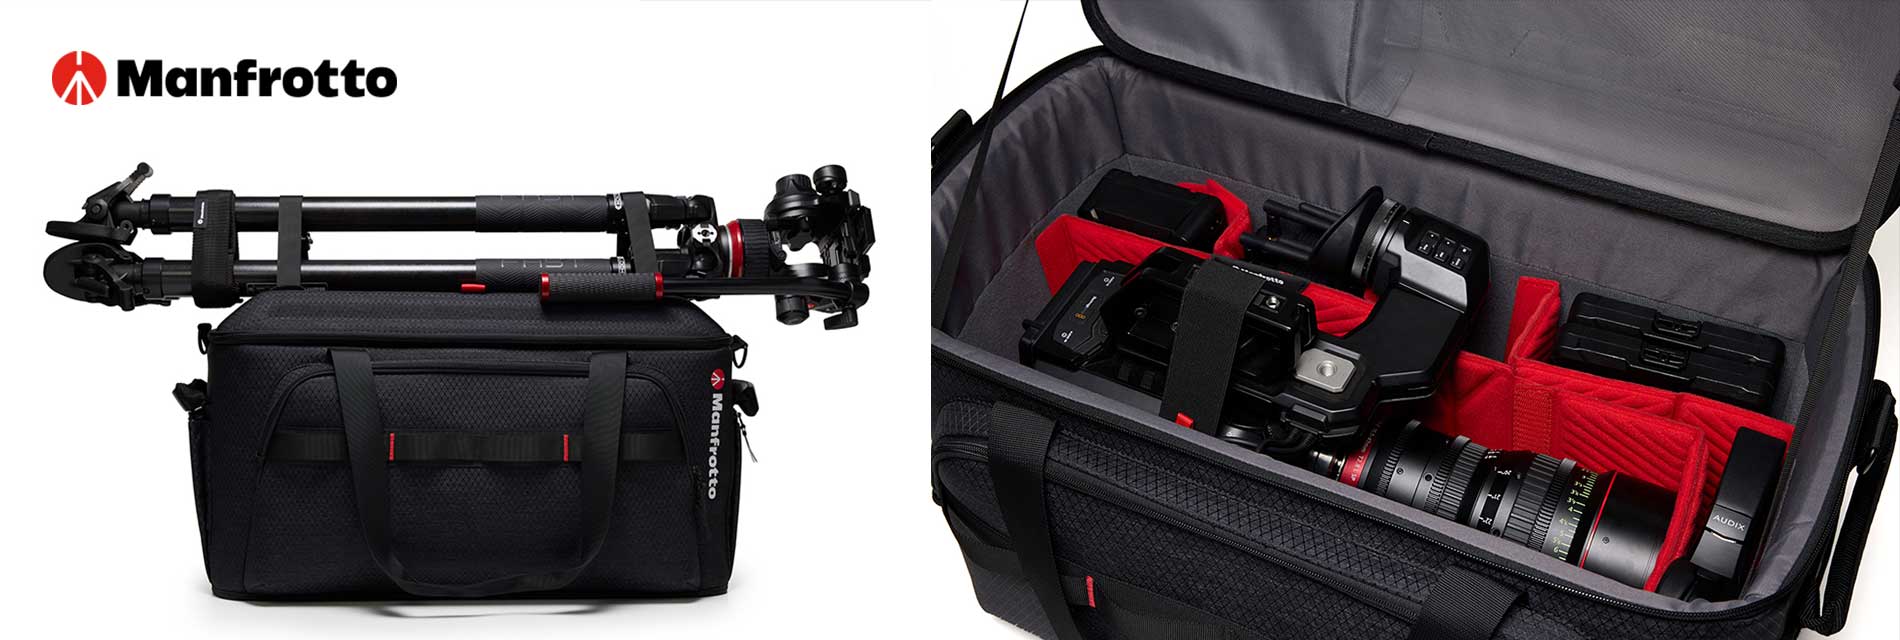 manfrotto new bag